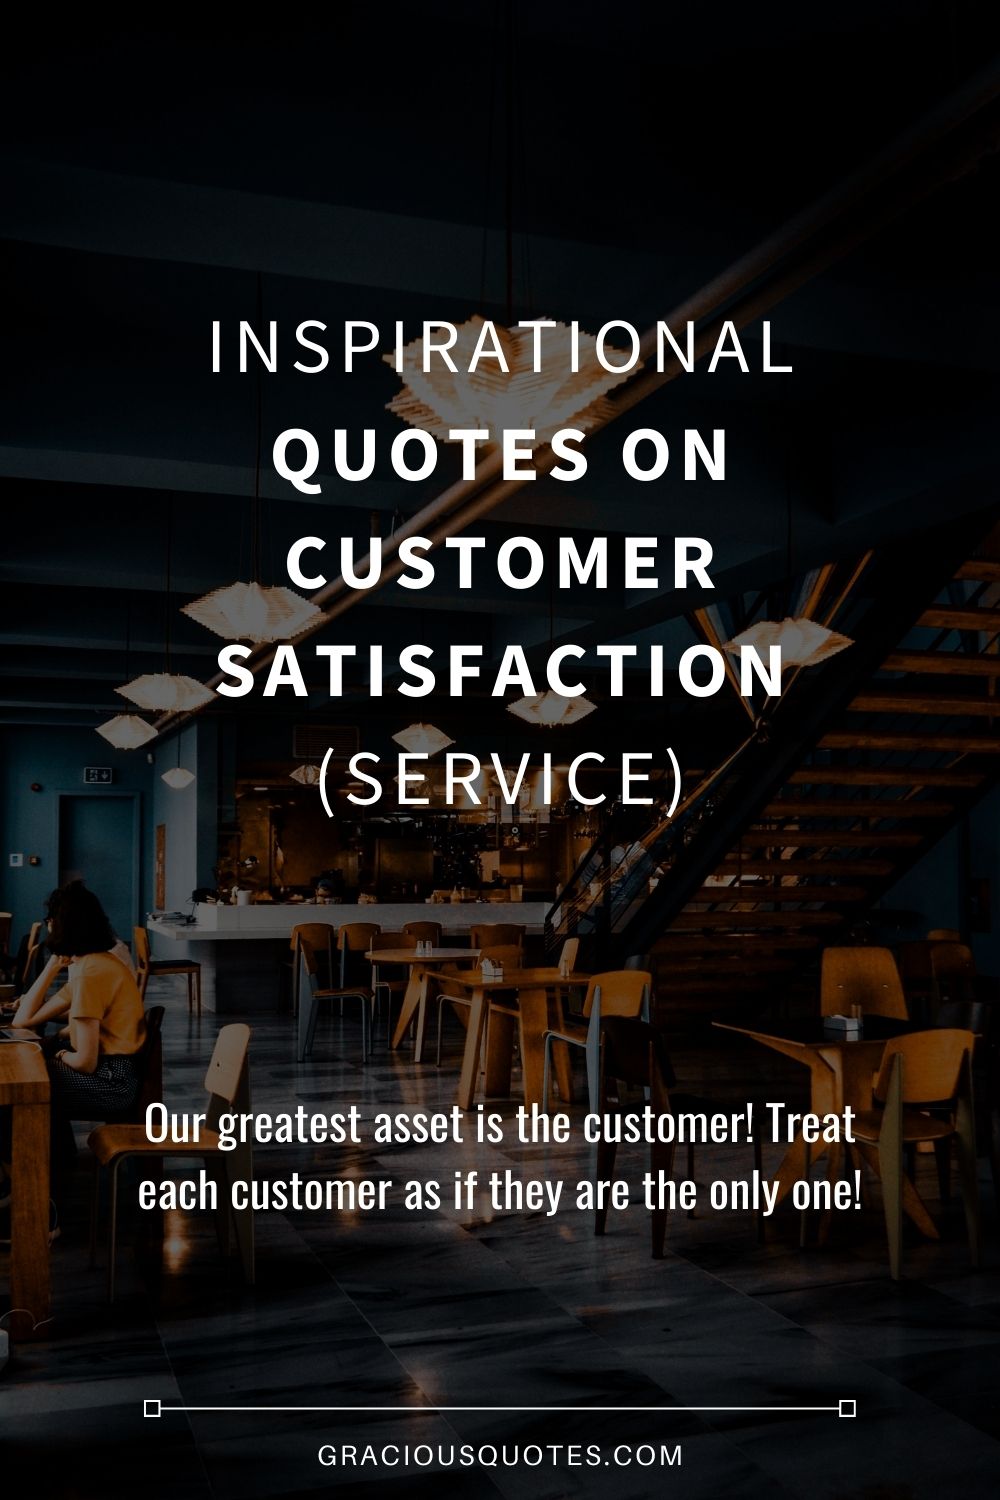 Inspirational Quotes on Customer Satisfaction (SERVICE) - Gracious Quotes